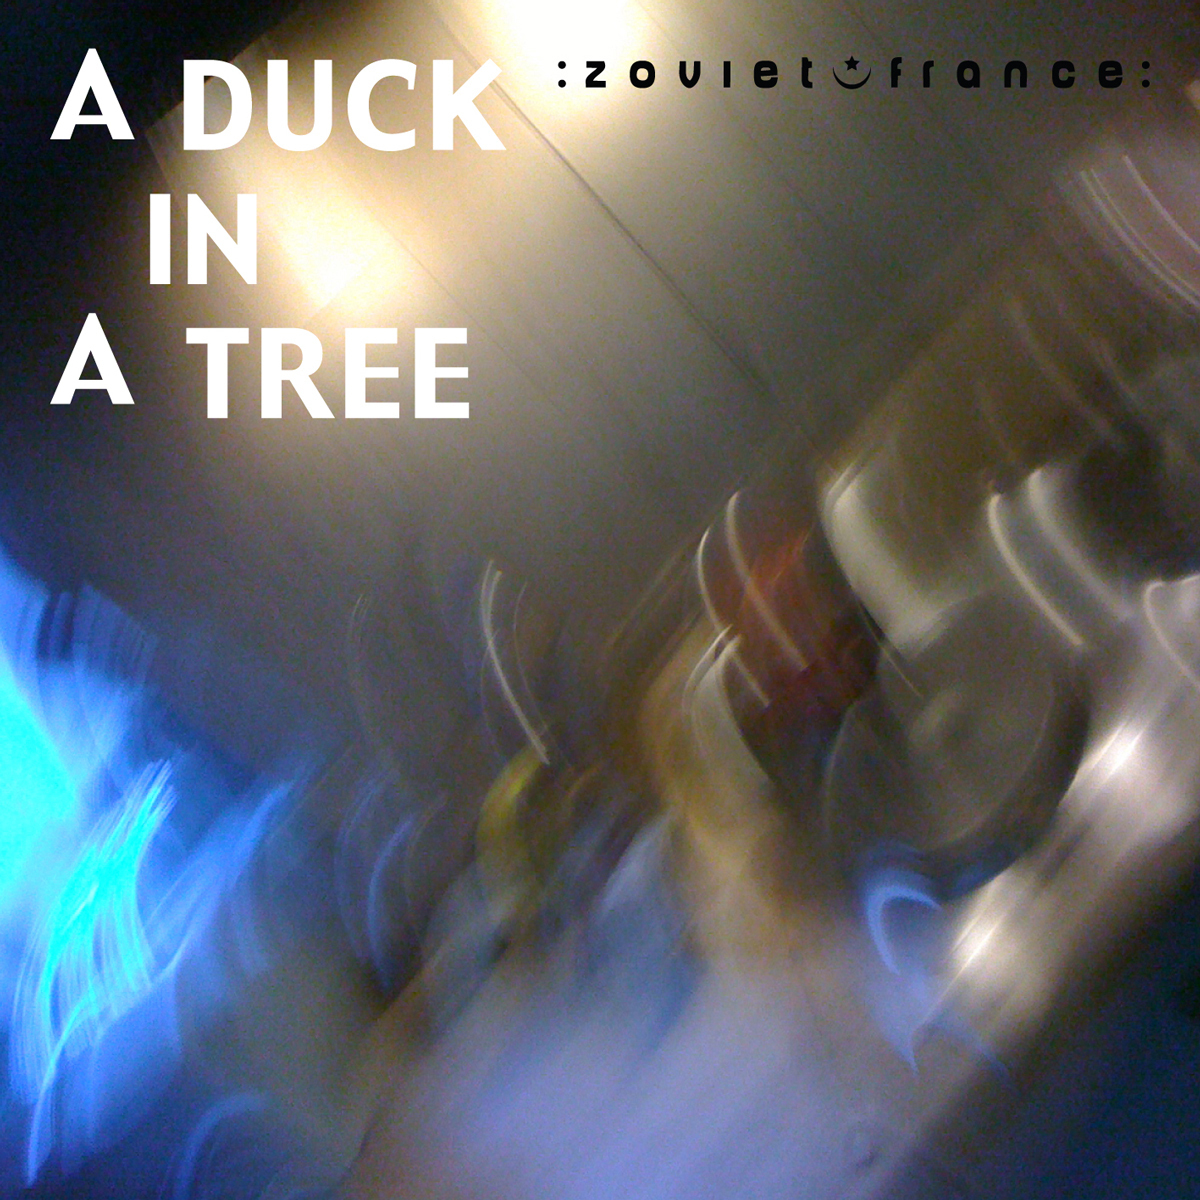 A-Duck-in-a-Tree-2012-12-08-_-Still-the-Surface-Captured-layout-1200.jpg